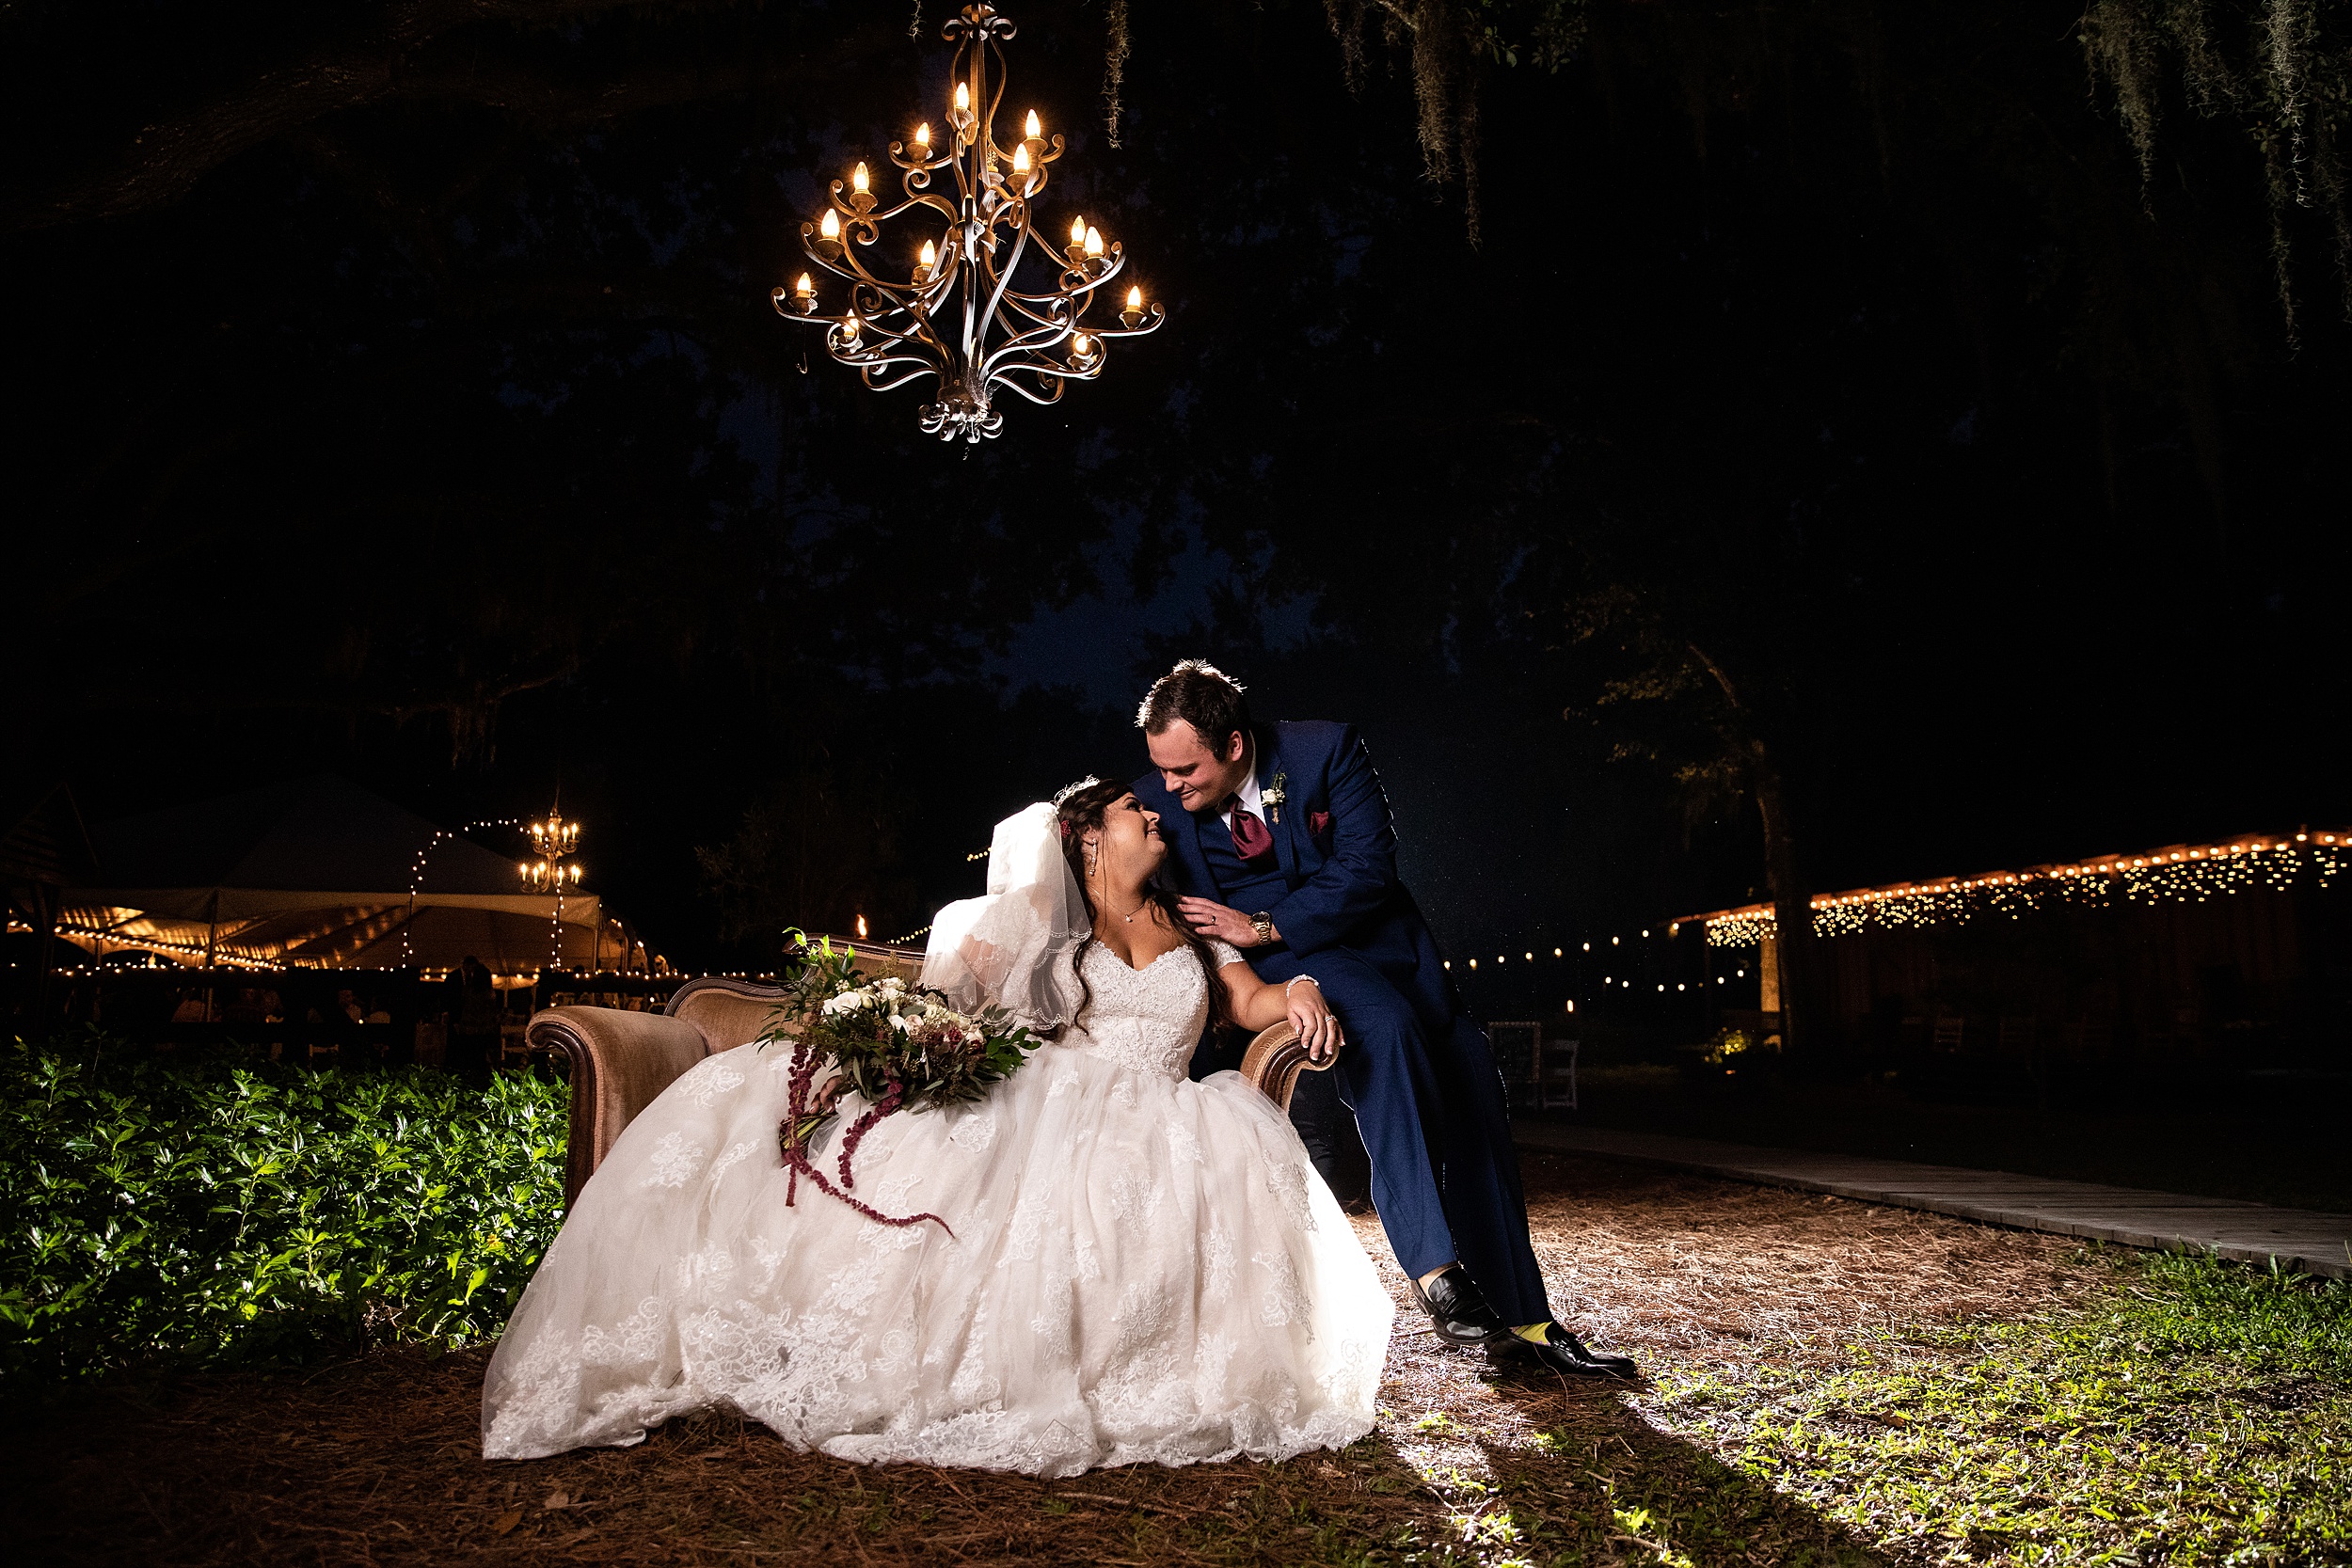 Newlyweds share a quiet moment on a vintage couch under an outdoor chandelier at night at their tucker's farmhouse wedding